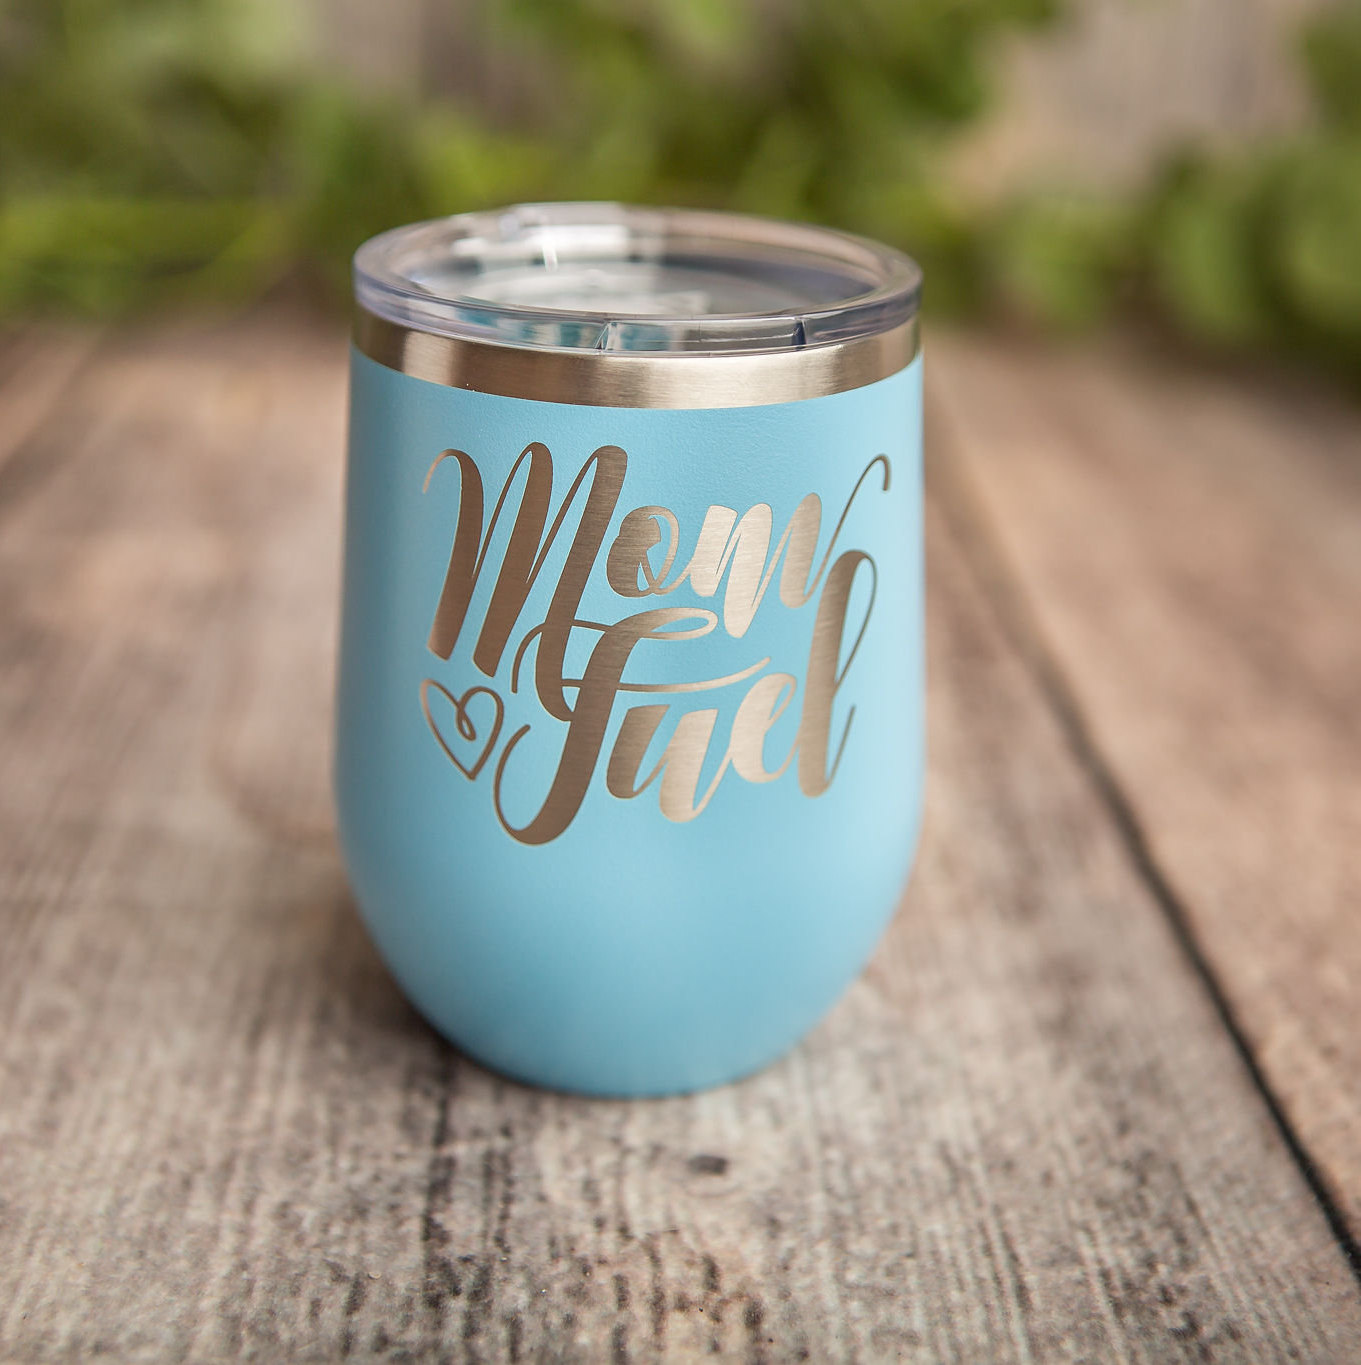 https://3cetching.com/wp-content/uploads/2020/09/mom-fuel-engraved-wine-tumbler-vacuum-insulated-tumbler-gift-gifts-for-wife-5f5fa87b.jpg